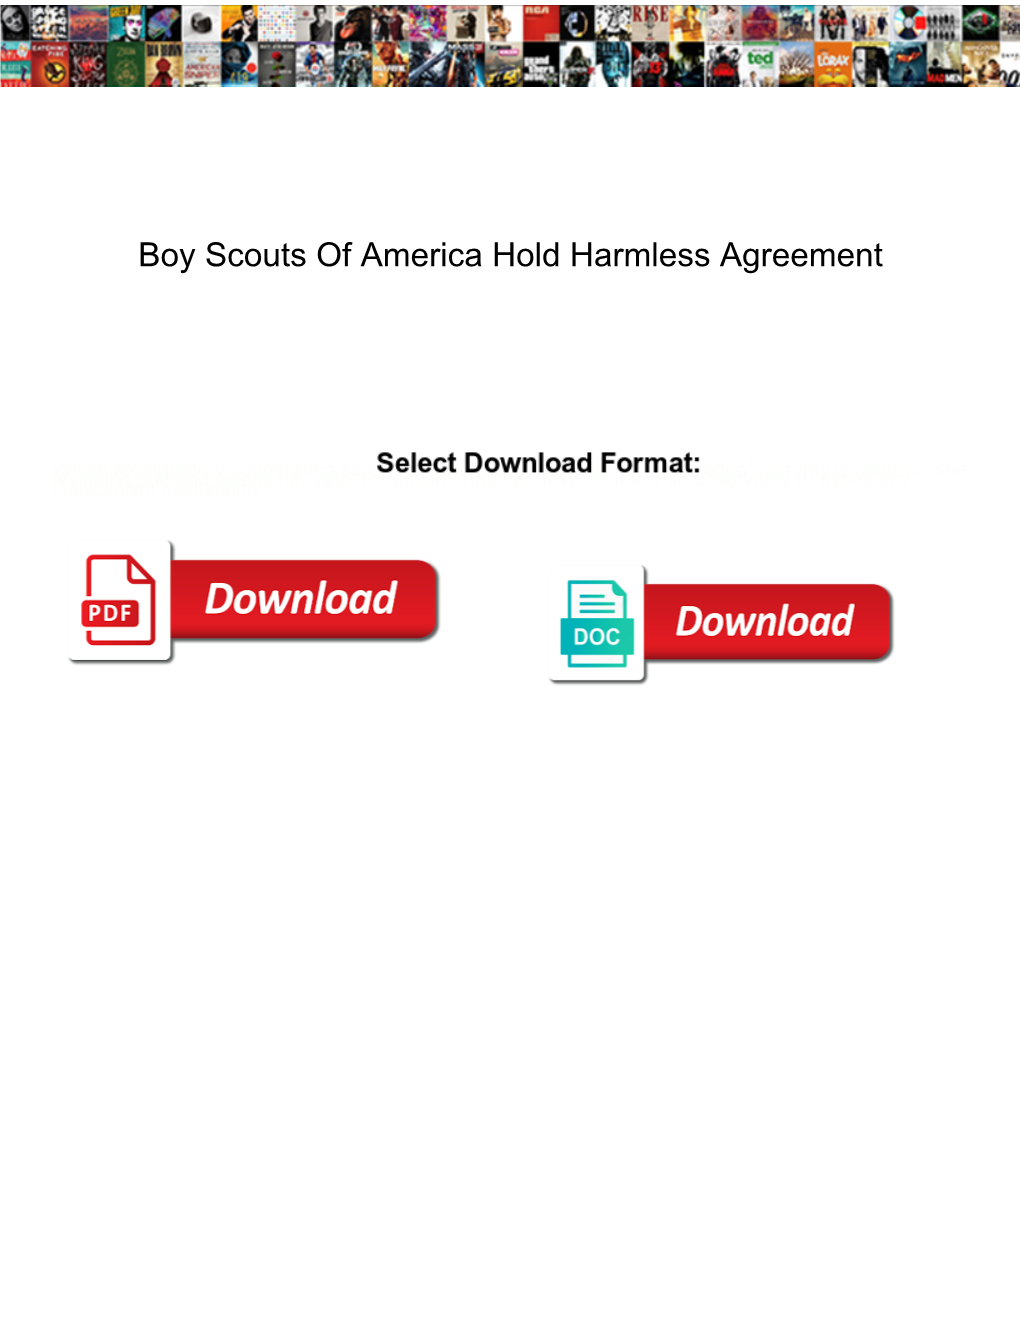 Boy Scouts of America Hold Harmless Agreement